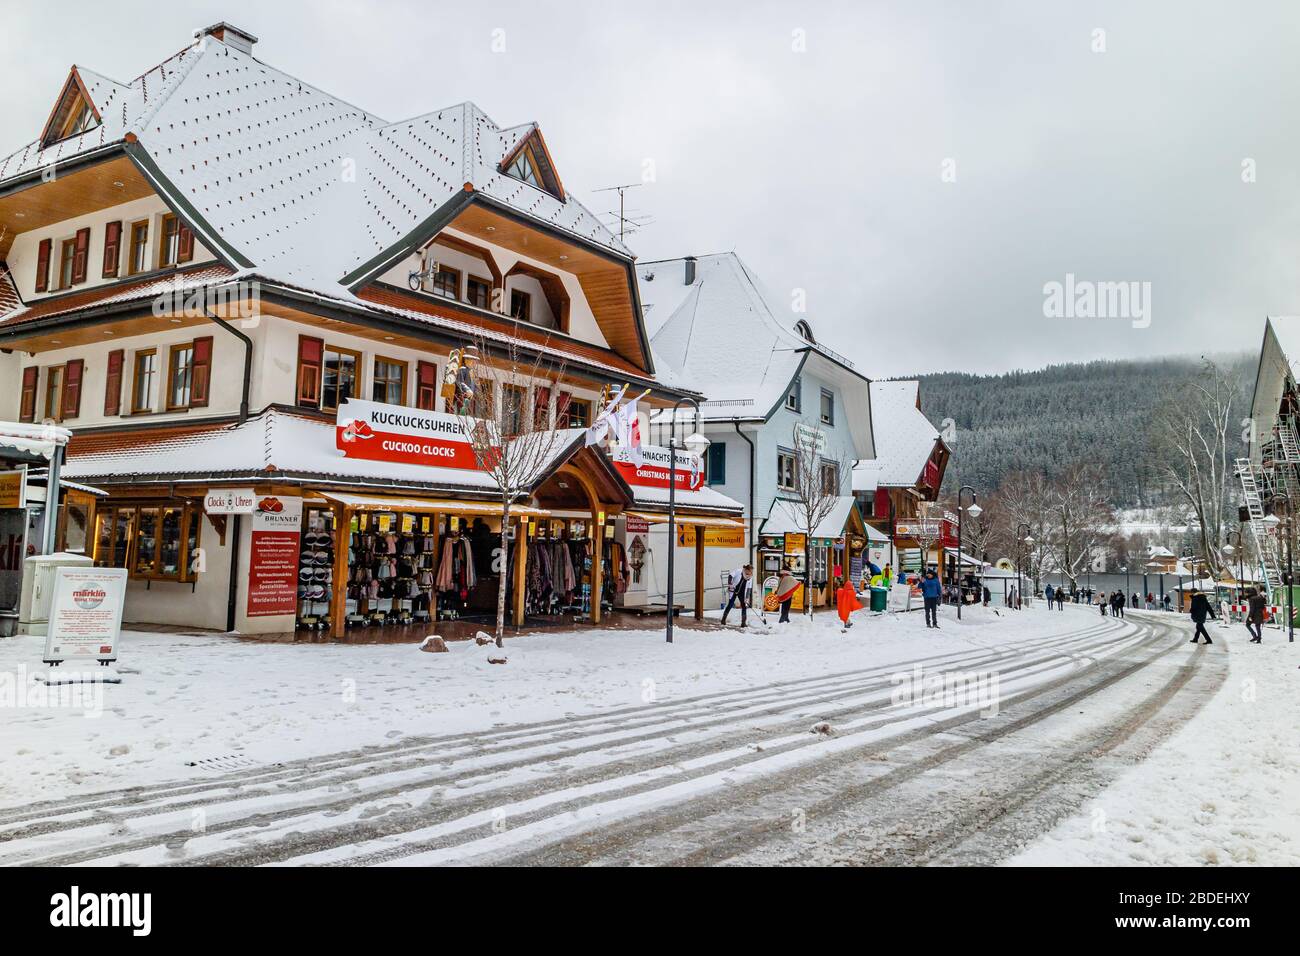 Souvenir shops in the town of Titisee in snowy weather, in the Schwarzwald / Black Forest region of Germany. February 2020. Stock Photo